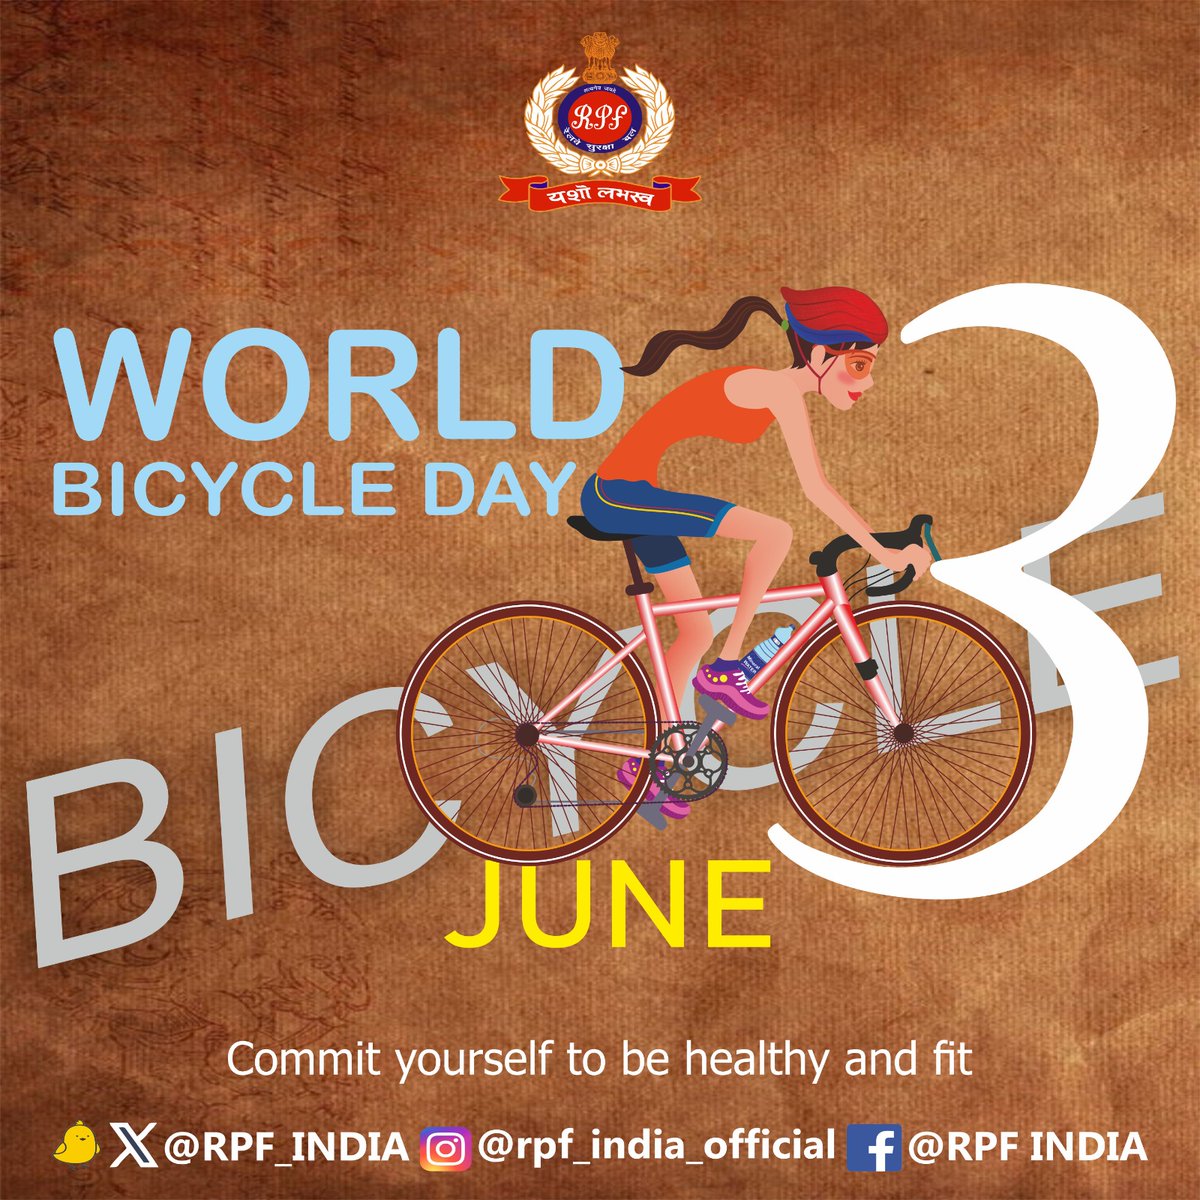 #Cycling is GOOD for your wallet, BETTER for your health, and EXCELLENT for our planet. Let’s pedal towards a greener & healthier future! #WorldBicycleDay #CycleForHealth #GreenTravel @RailMinIndia